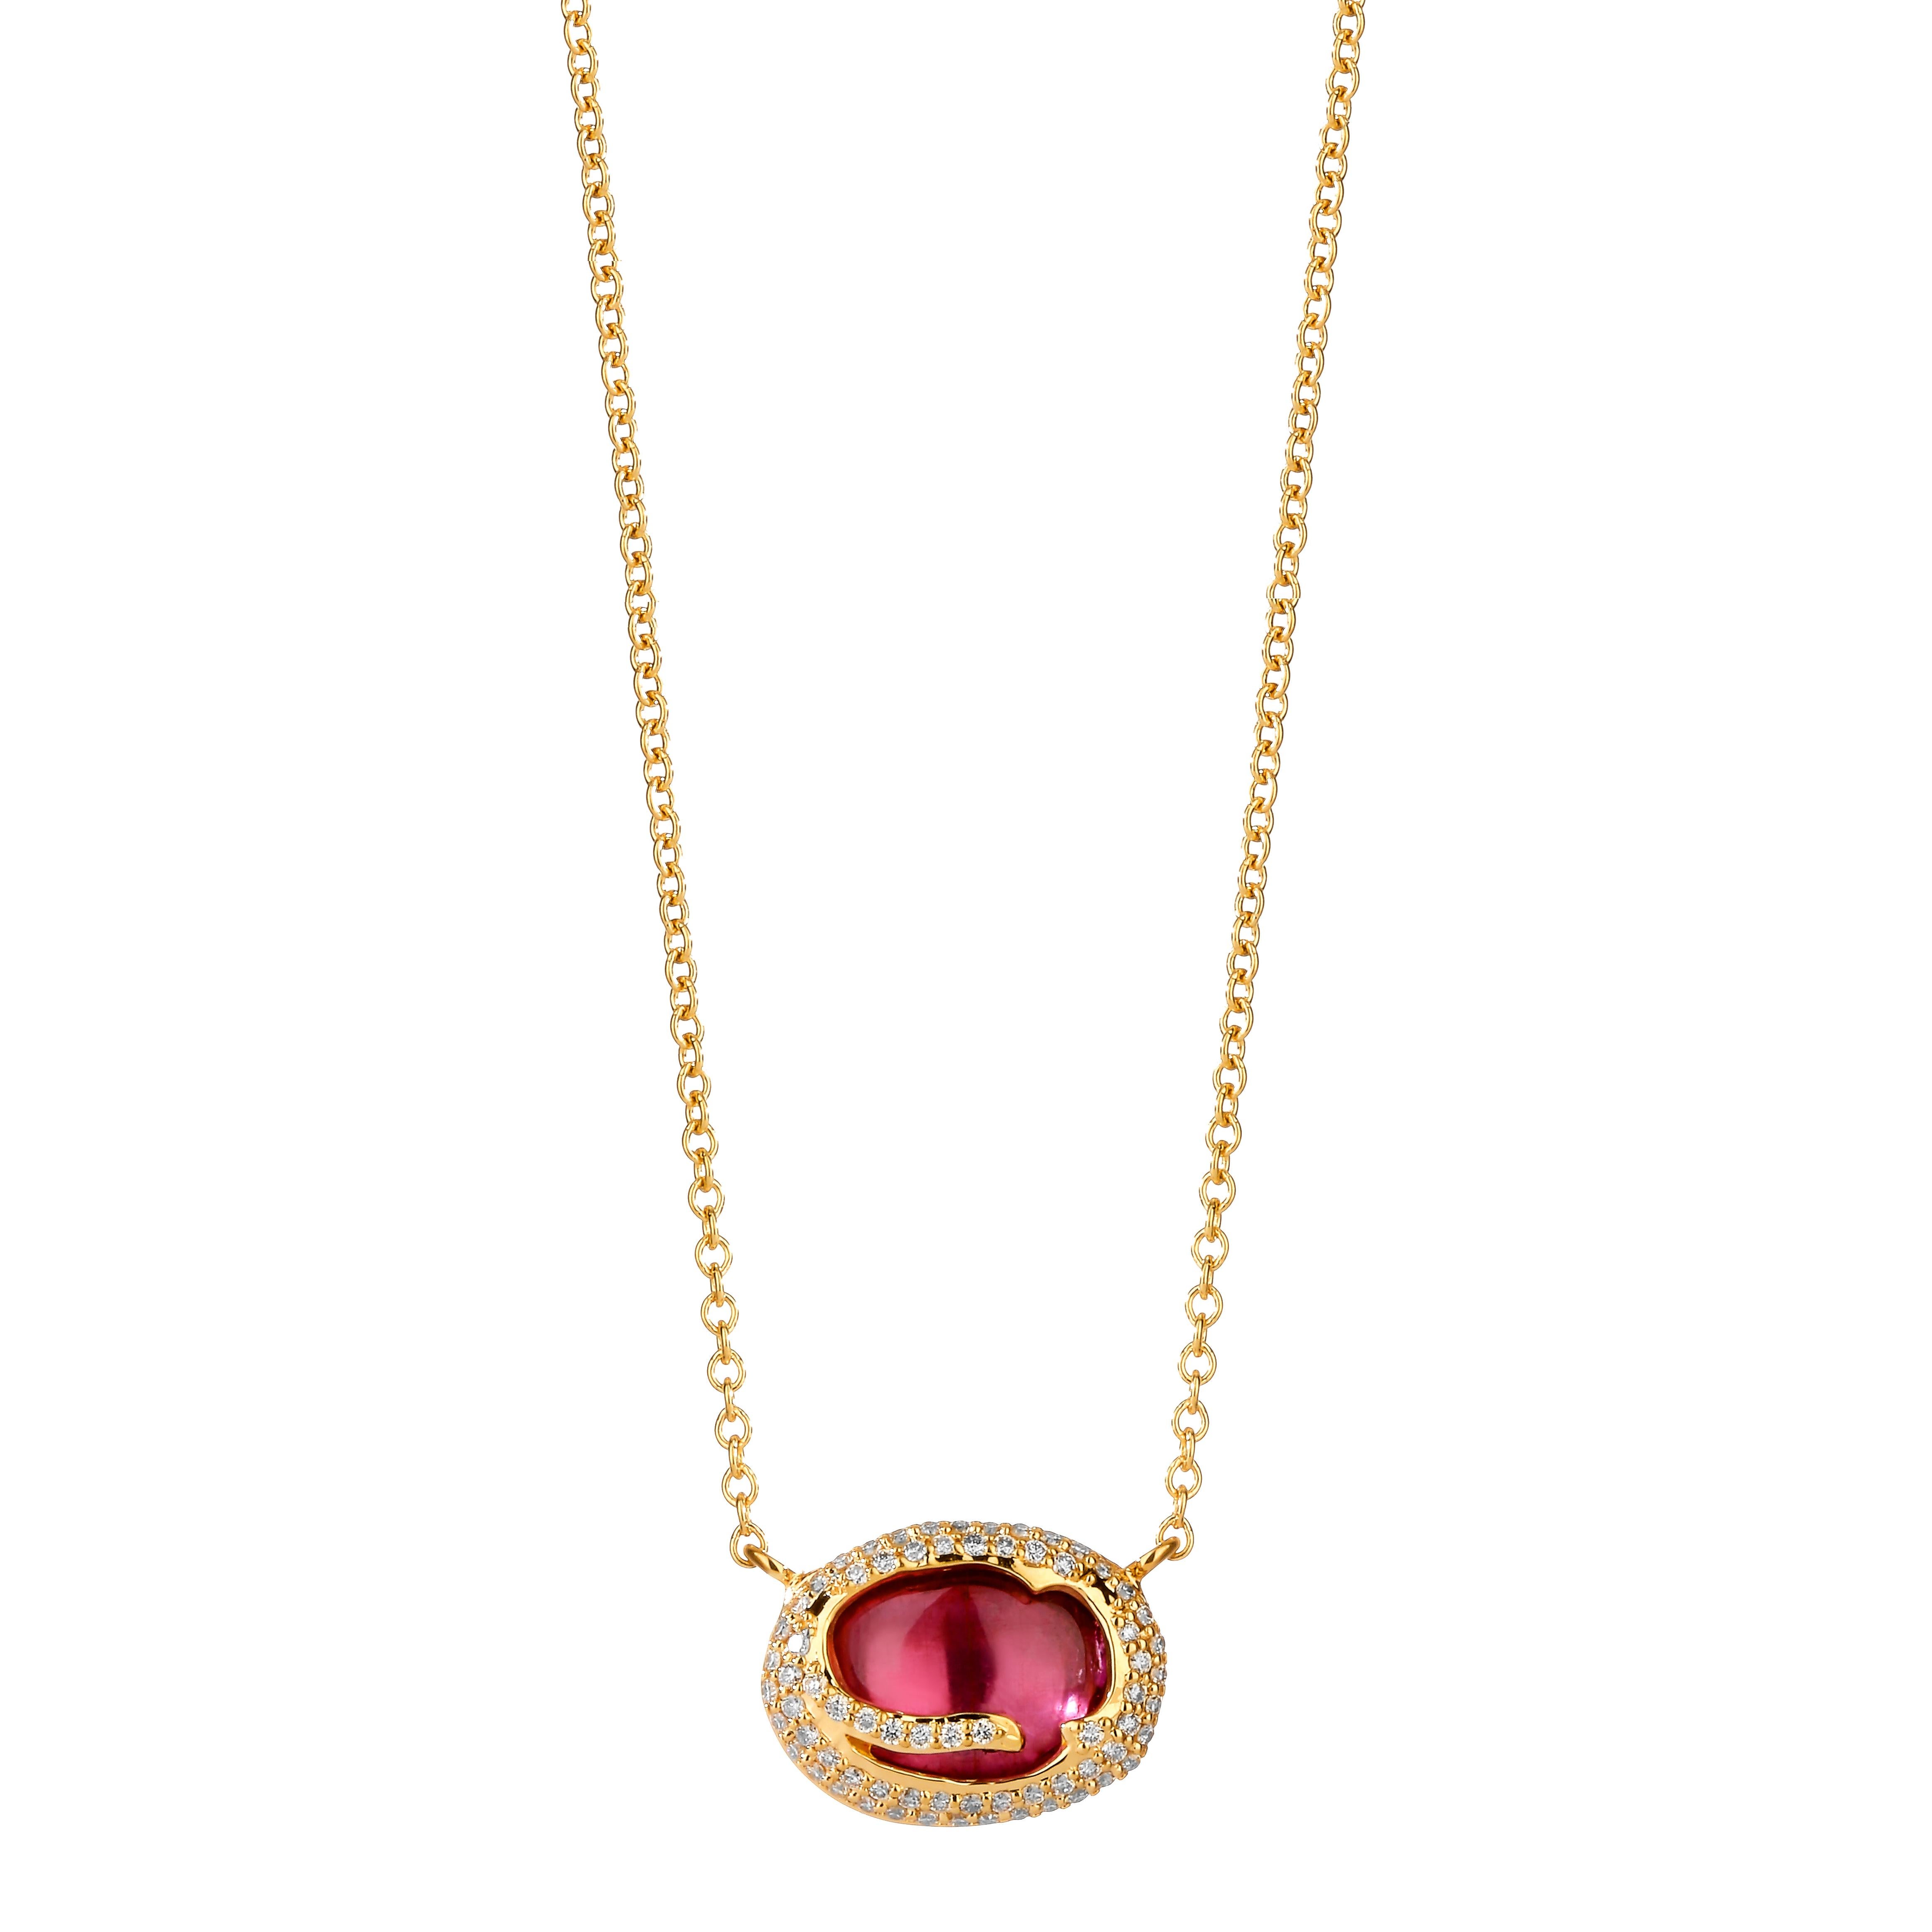 Created in 18 karat yellow gold
Pink Tourmaline 7 cts approx
Diamonds 0.40 ct approx
18k yg 18 inch cable chain with lobster lock
Chain can be worn at 16th inch & 17th inch
Limited edition

Formed from 18K yellow gold, this limited edition necklace